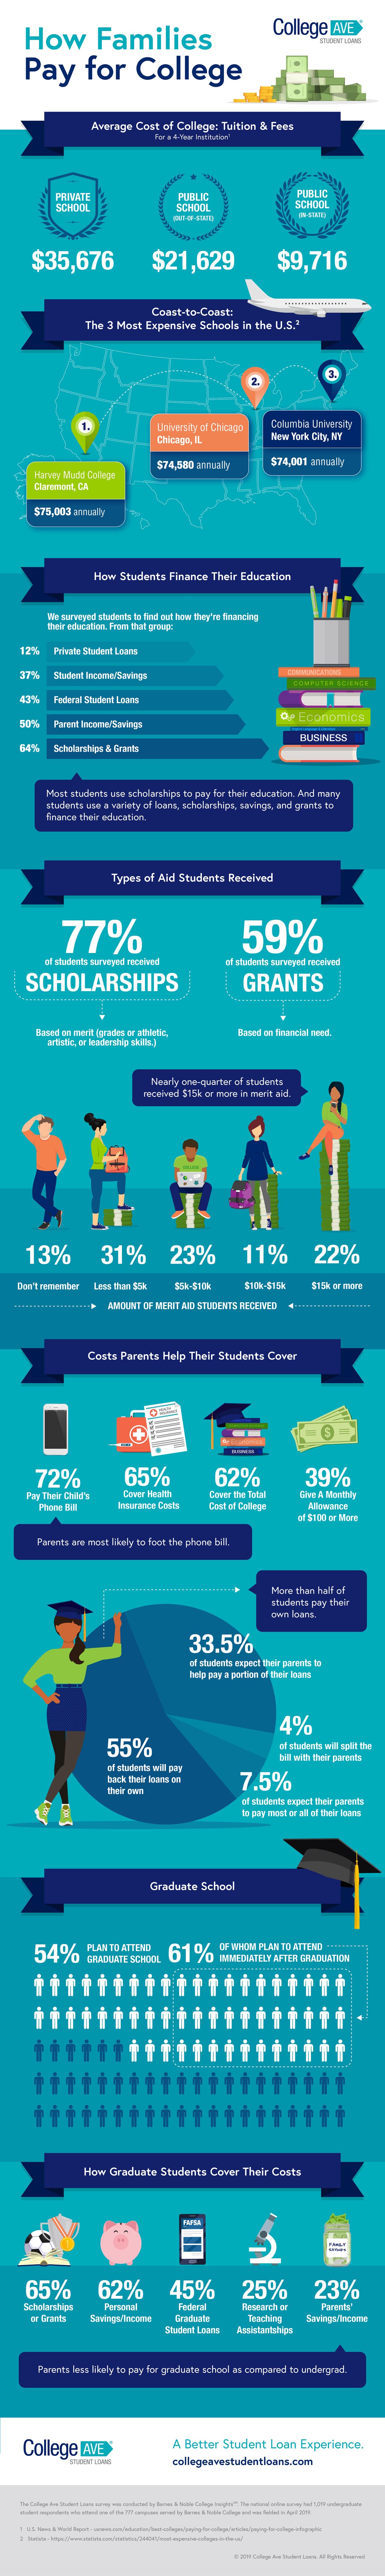 How Families Pay for College in 2019